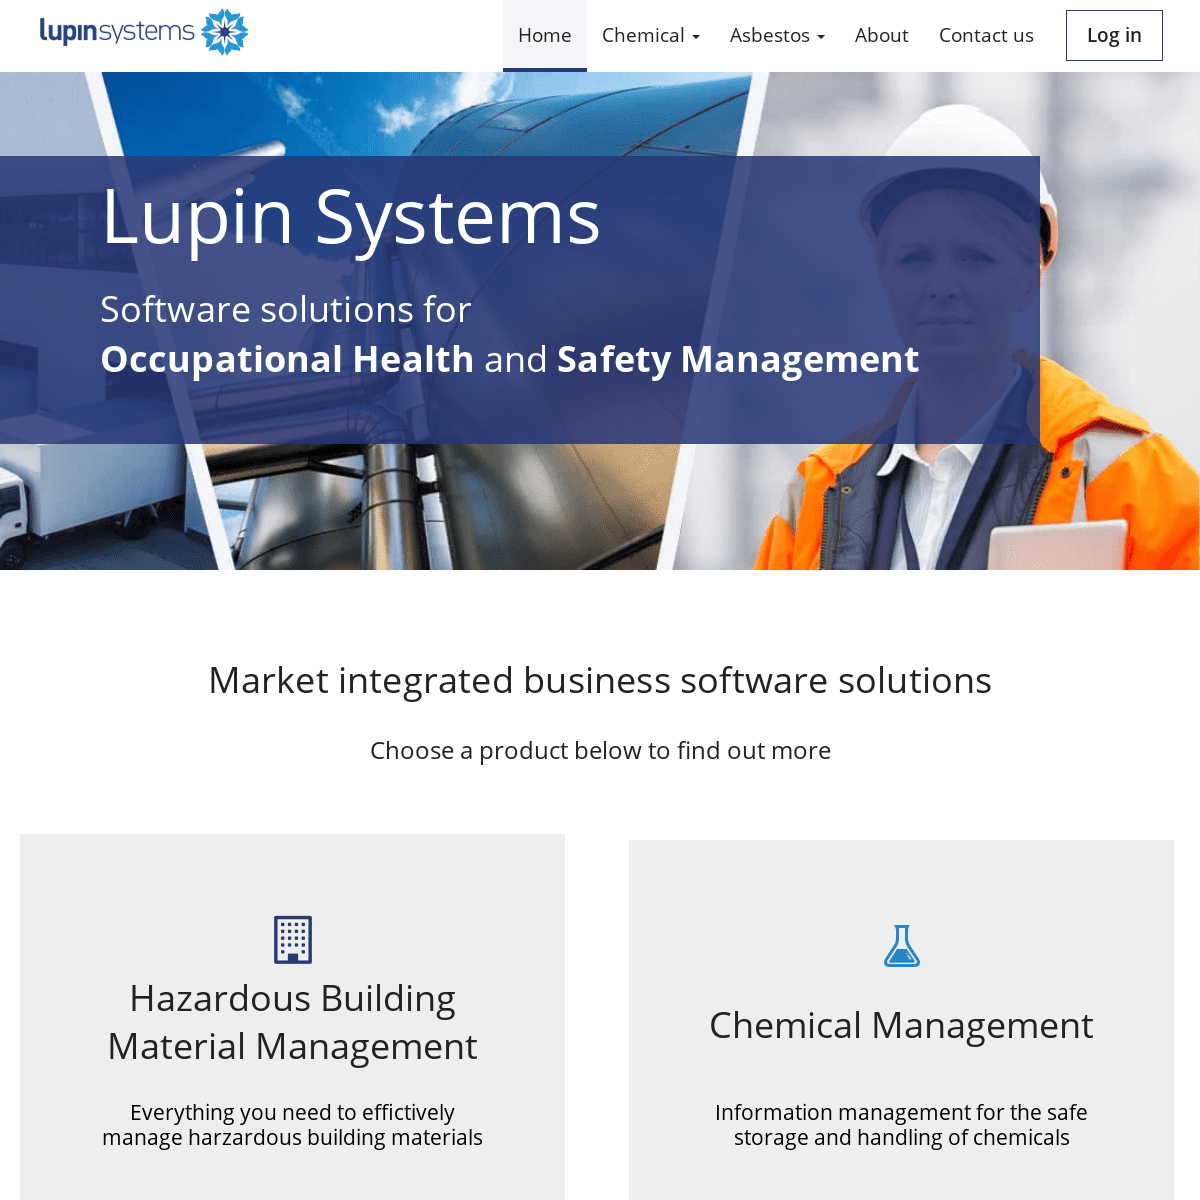 Lupin Systems - Asbestos Auditor/Consultant Software and Chemical/SDS Management Sofware - Lupin Systems